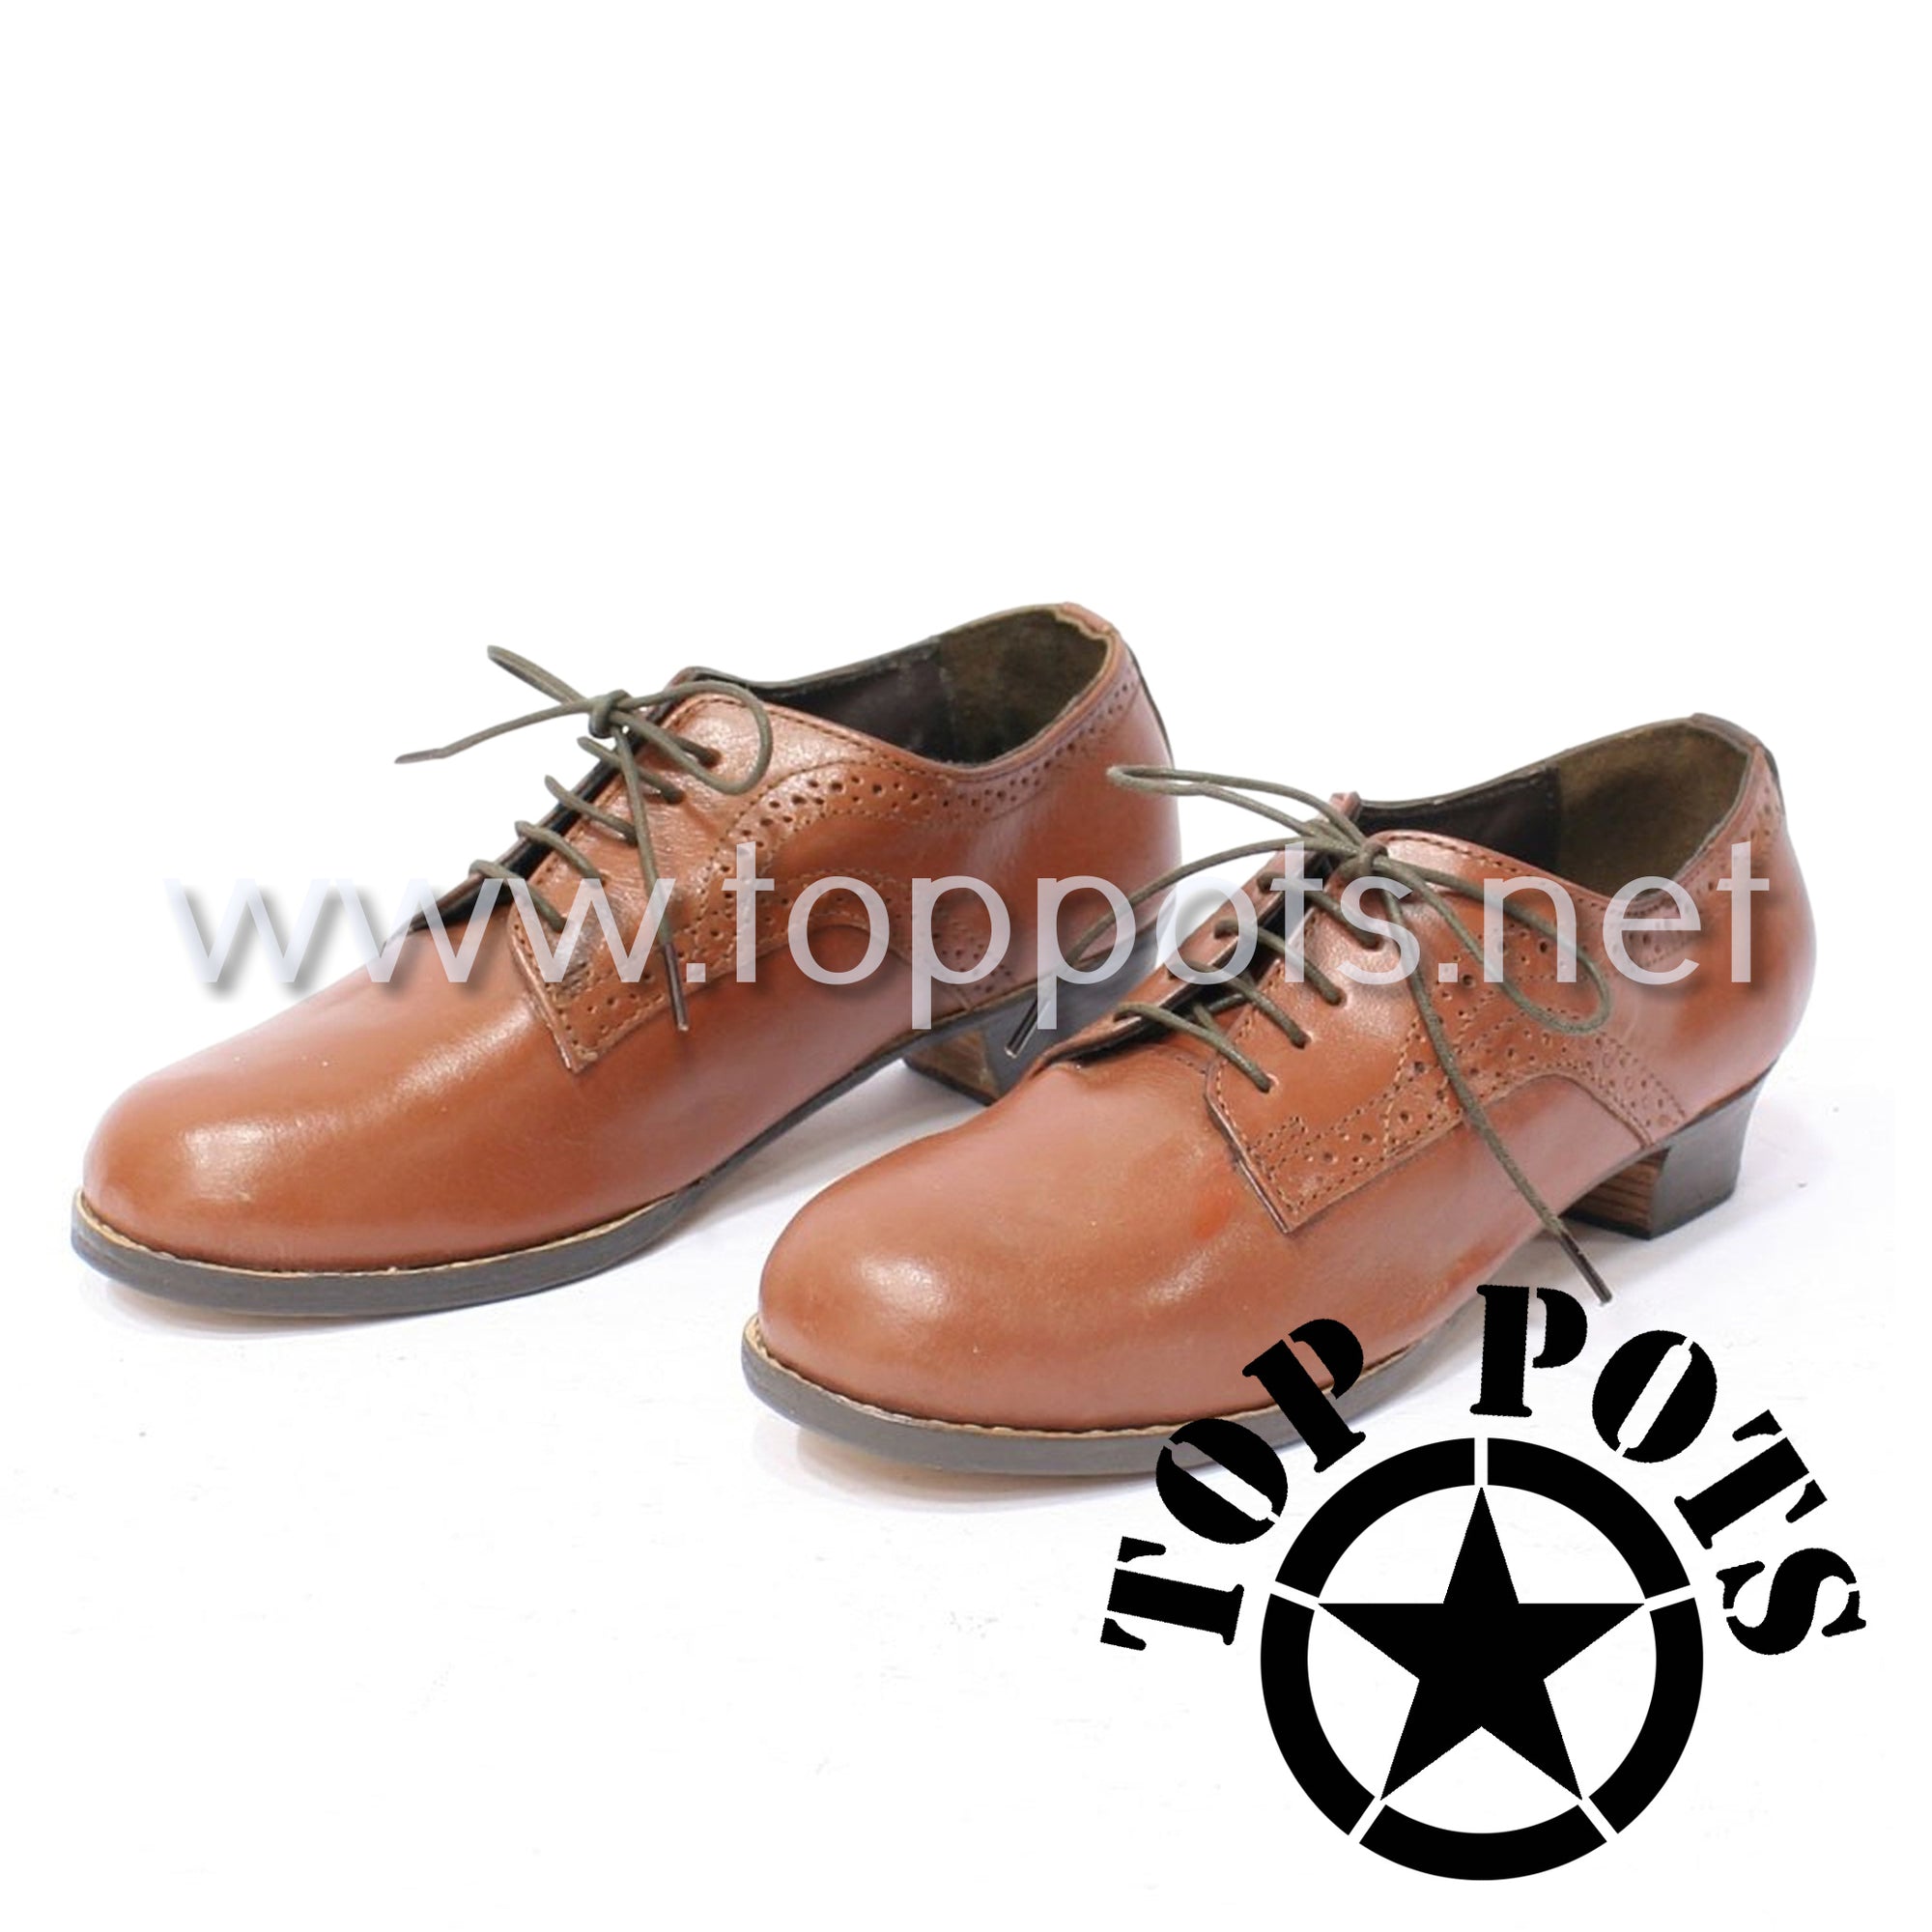 WWII US Army Reproduction Leather WAC Officer and Enlisted Uniform Russet Brown Service Shoe – Low Ankle Cut